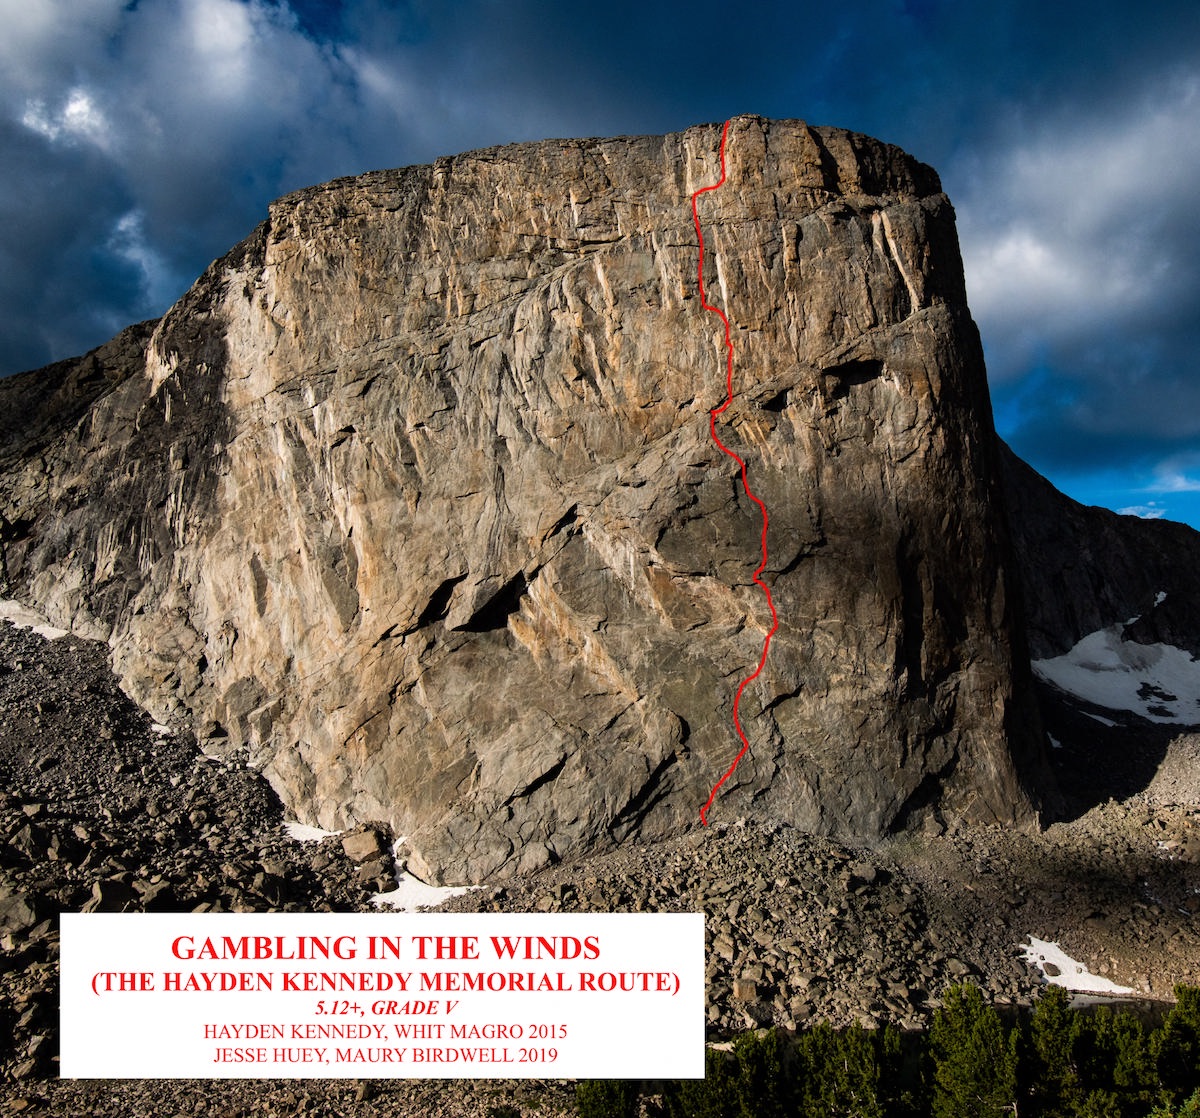 Mt. Hooker with Gambling in the Winds (V 5.12+, 2,000') drawn in red. [Photo] Austin Siadak